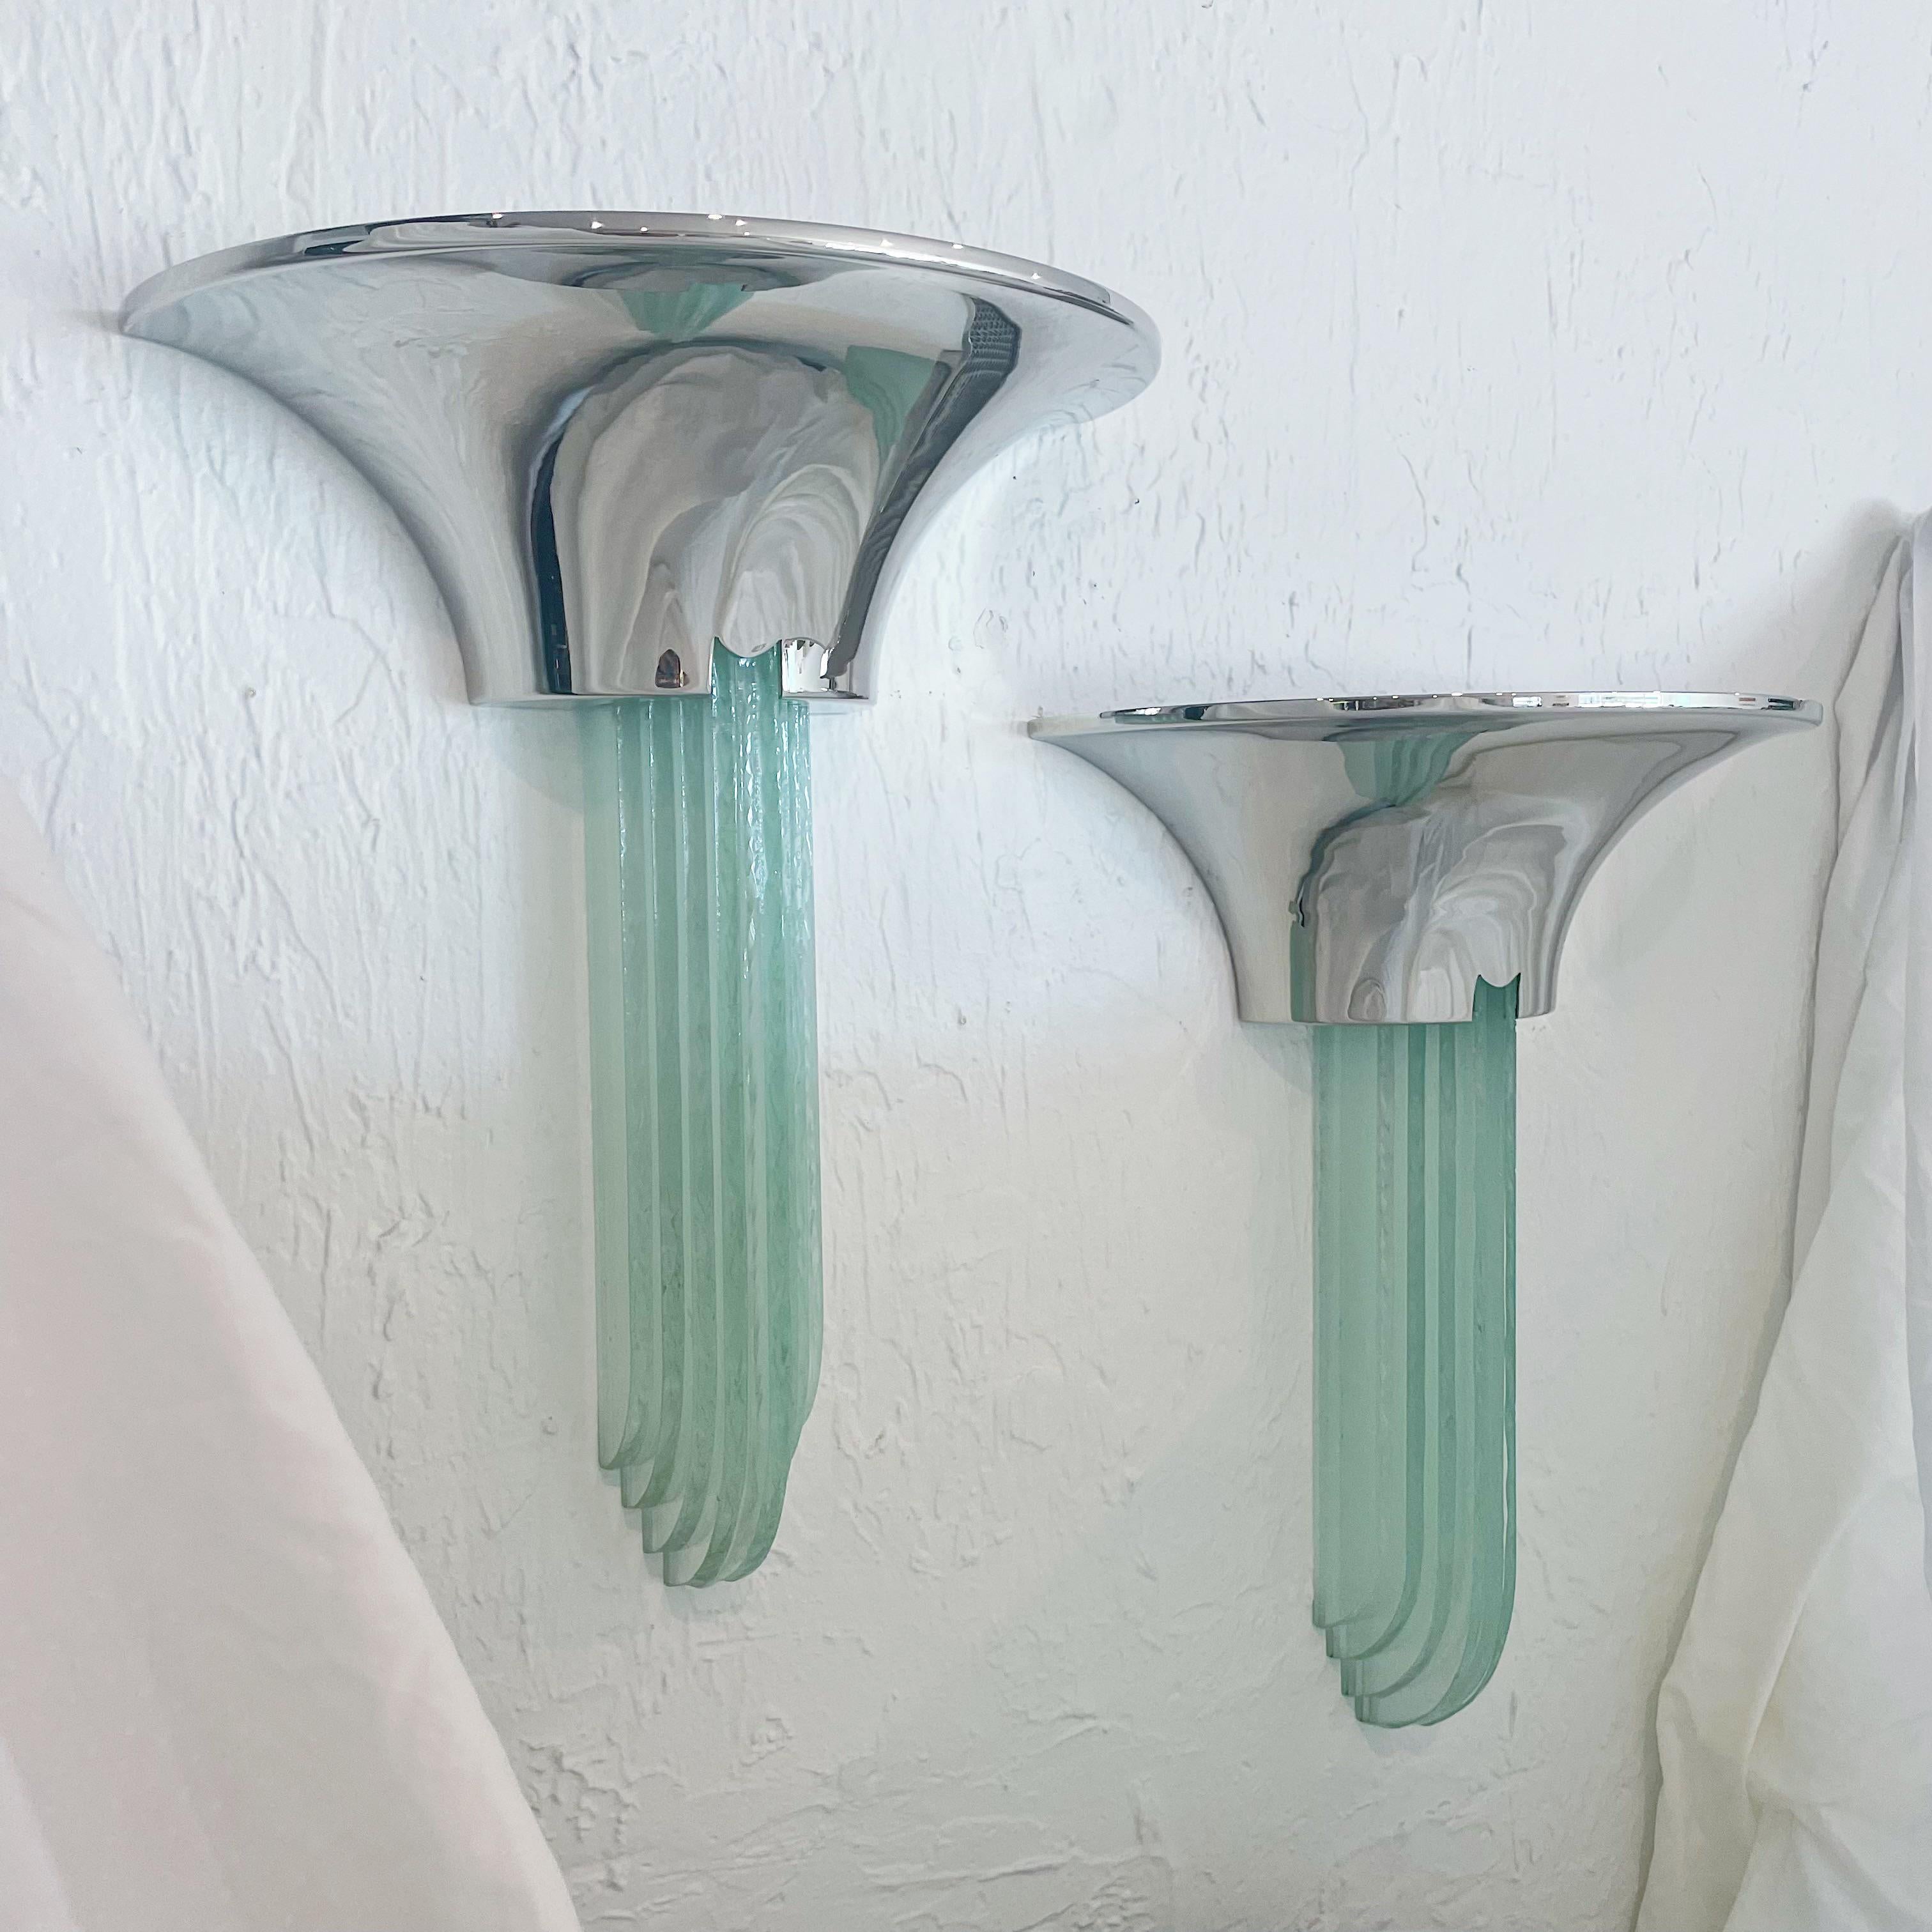 Pair of hand chipped green glass sconces with polished stainless steel by Karl Springer, after Jean Perzel. With inset metal mesh light diffuser.